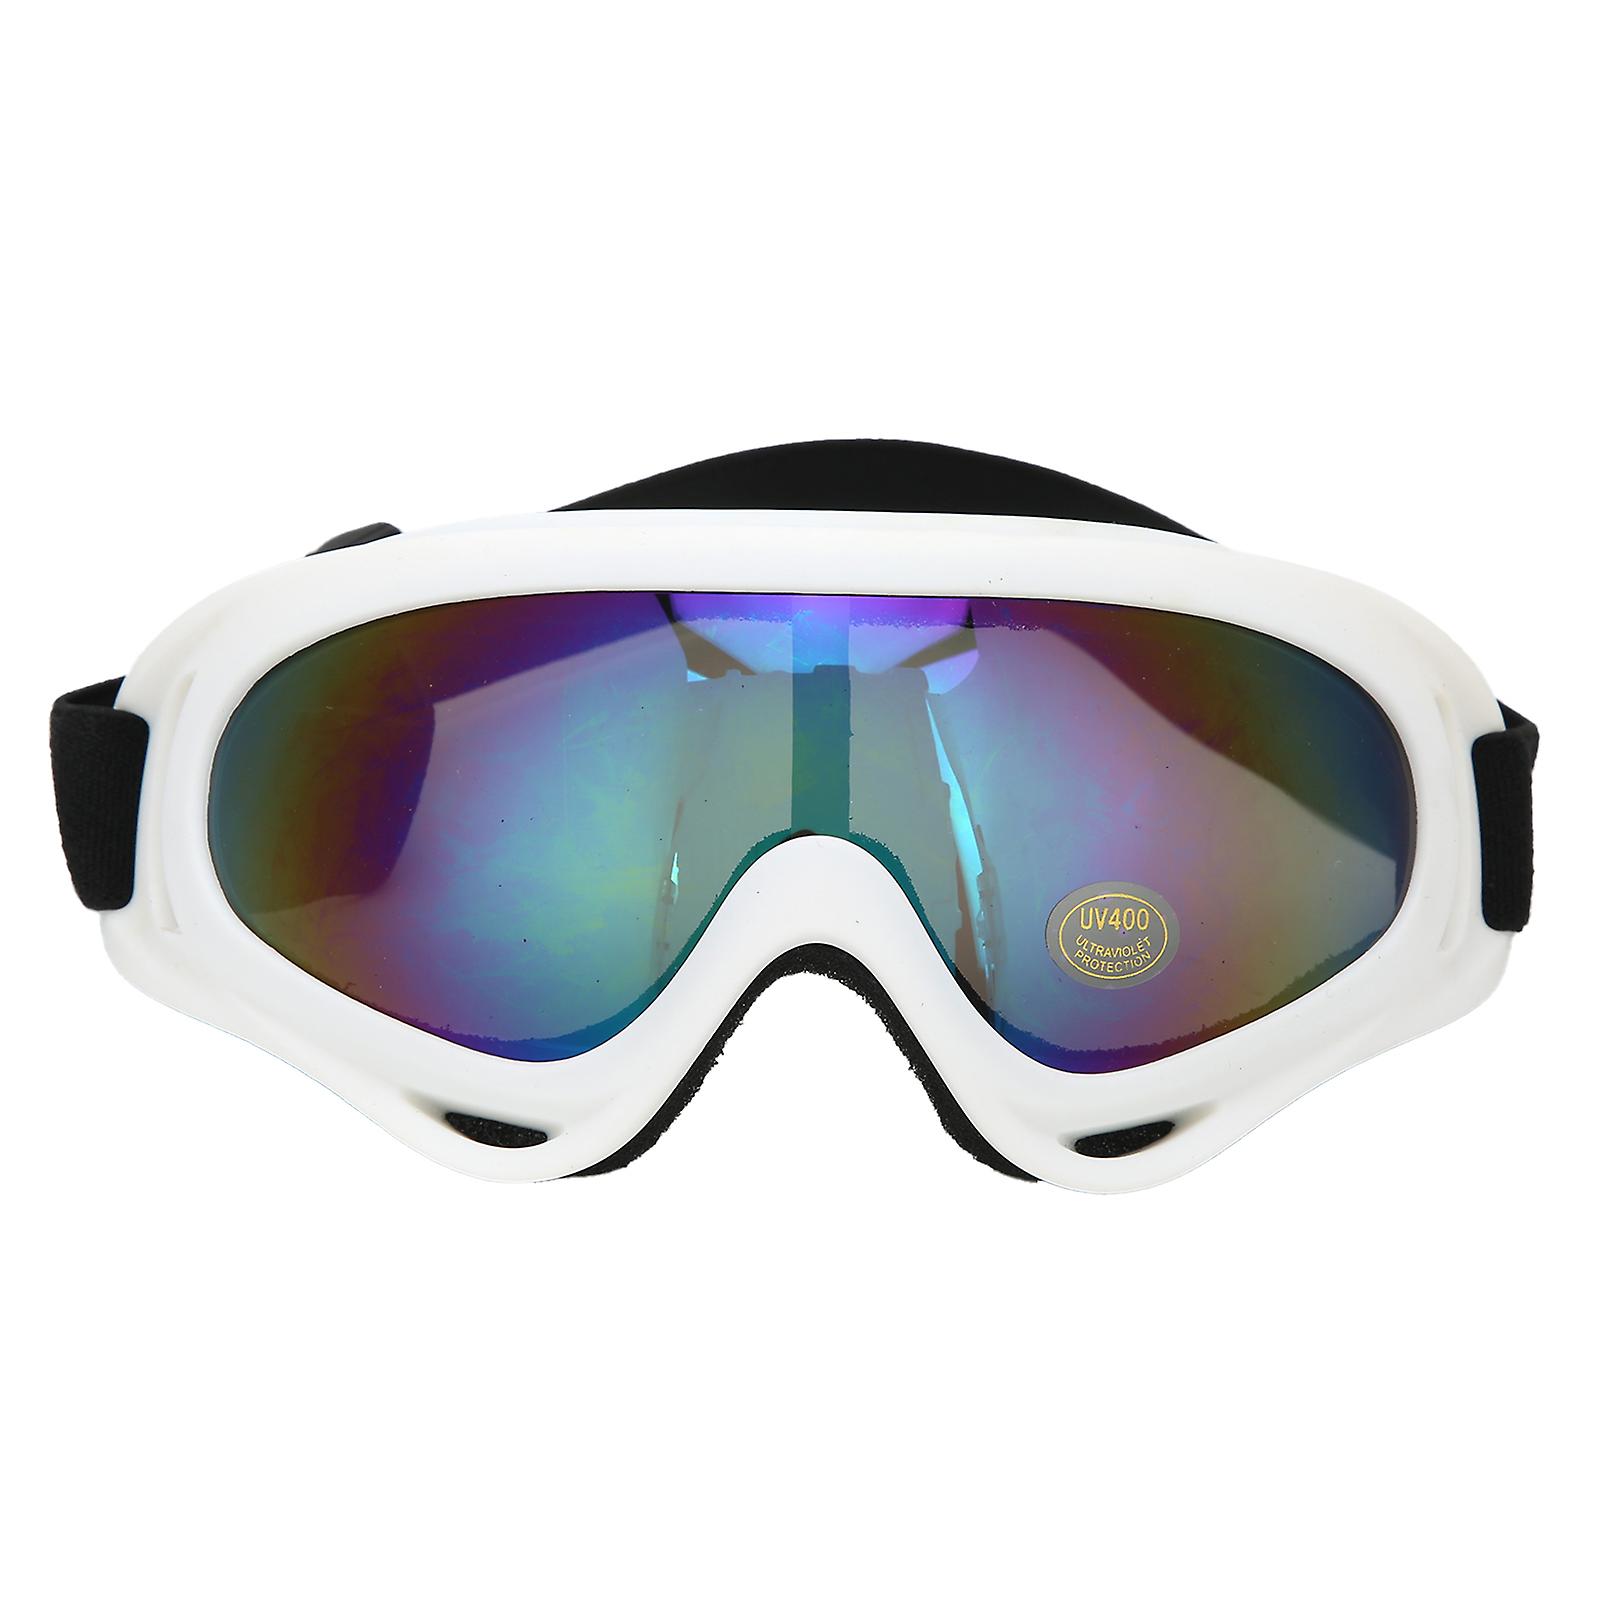 Childrens Ski Goggles Antifog Snow Sports Glasses Double Layer Windproof Uvresistant